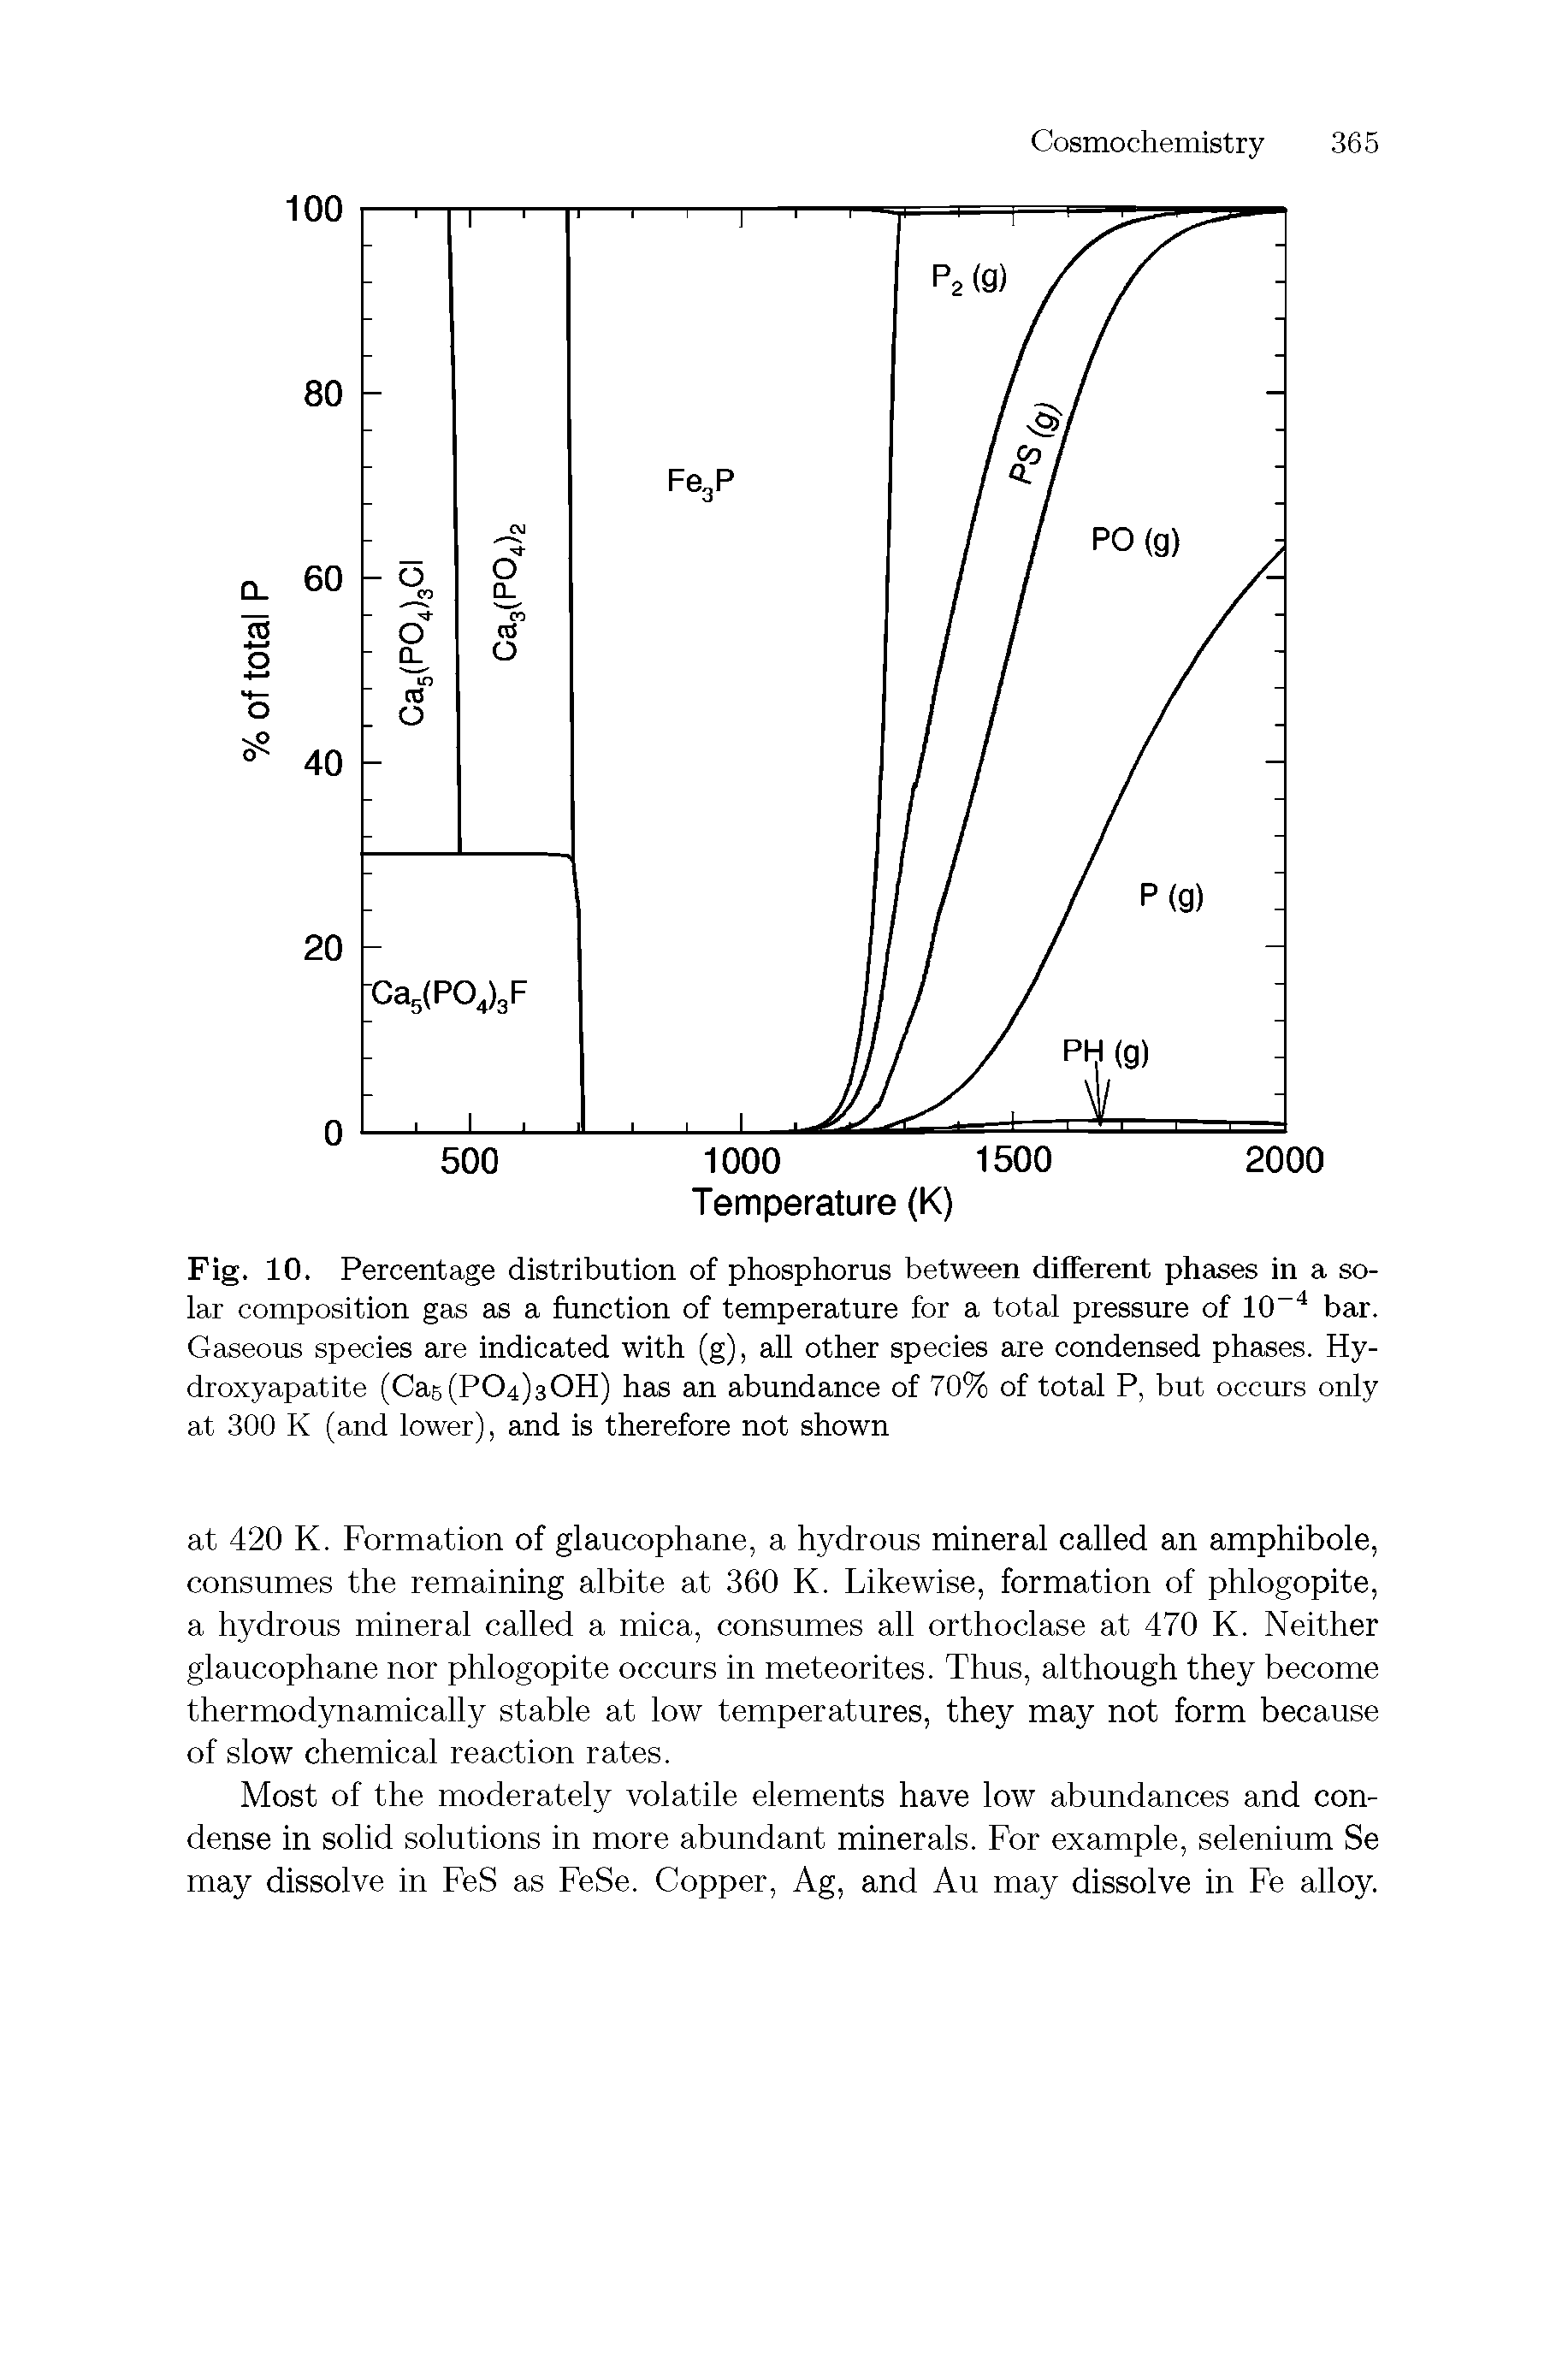 Fig. 10. Percentage distribution of phosphorus between different phases in a solar composition gas as a function of temperature for a total pressure of 10-4 bar. Gaseous species are indicated with (g), all other species are condensed phases. Hydroxyapatite (Ca5(PC>4)30H) has an abundance of 70% of total P, but occurs only at 300 K (and lower), and is therefore not shown...